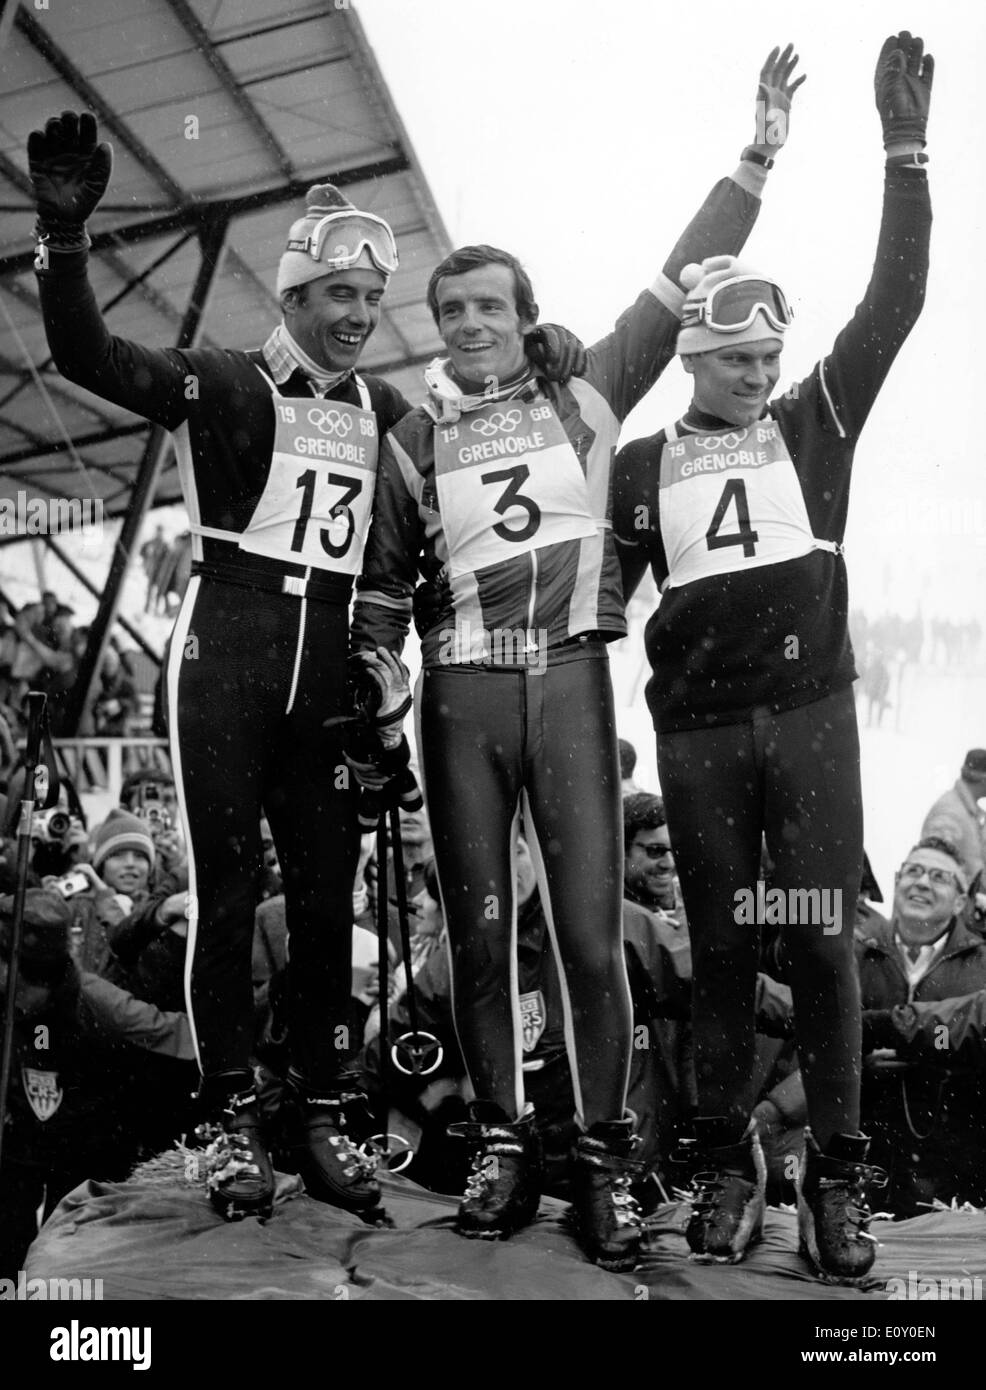 Feb 03, 1968; Grenoble, FRANCE; The French skier JEAN CLAUDE KILLY (3) celebrating for his second gold medal. Next to him are Stock Photo